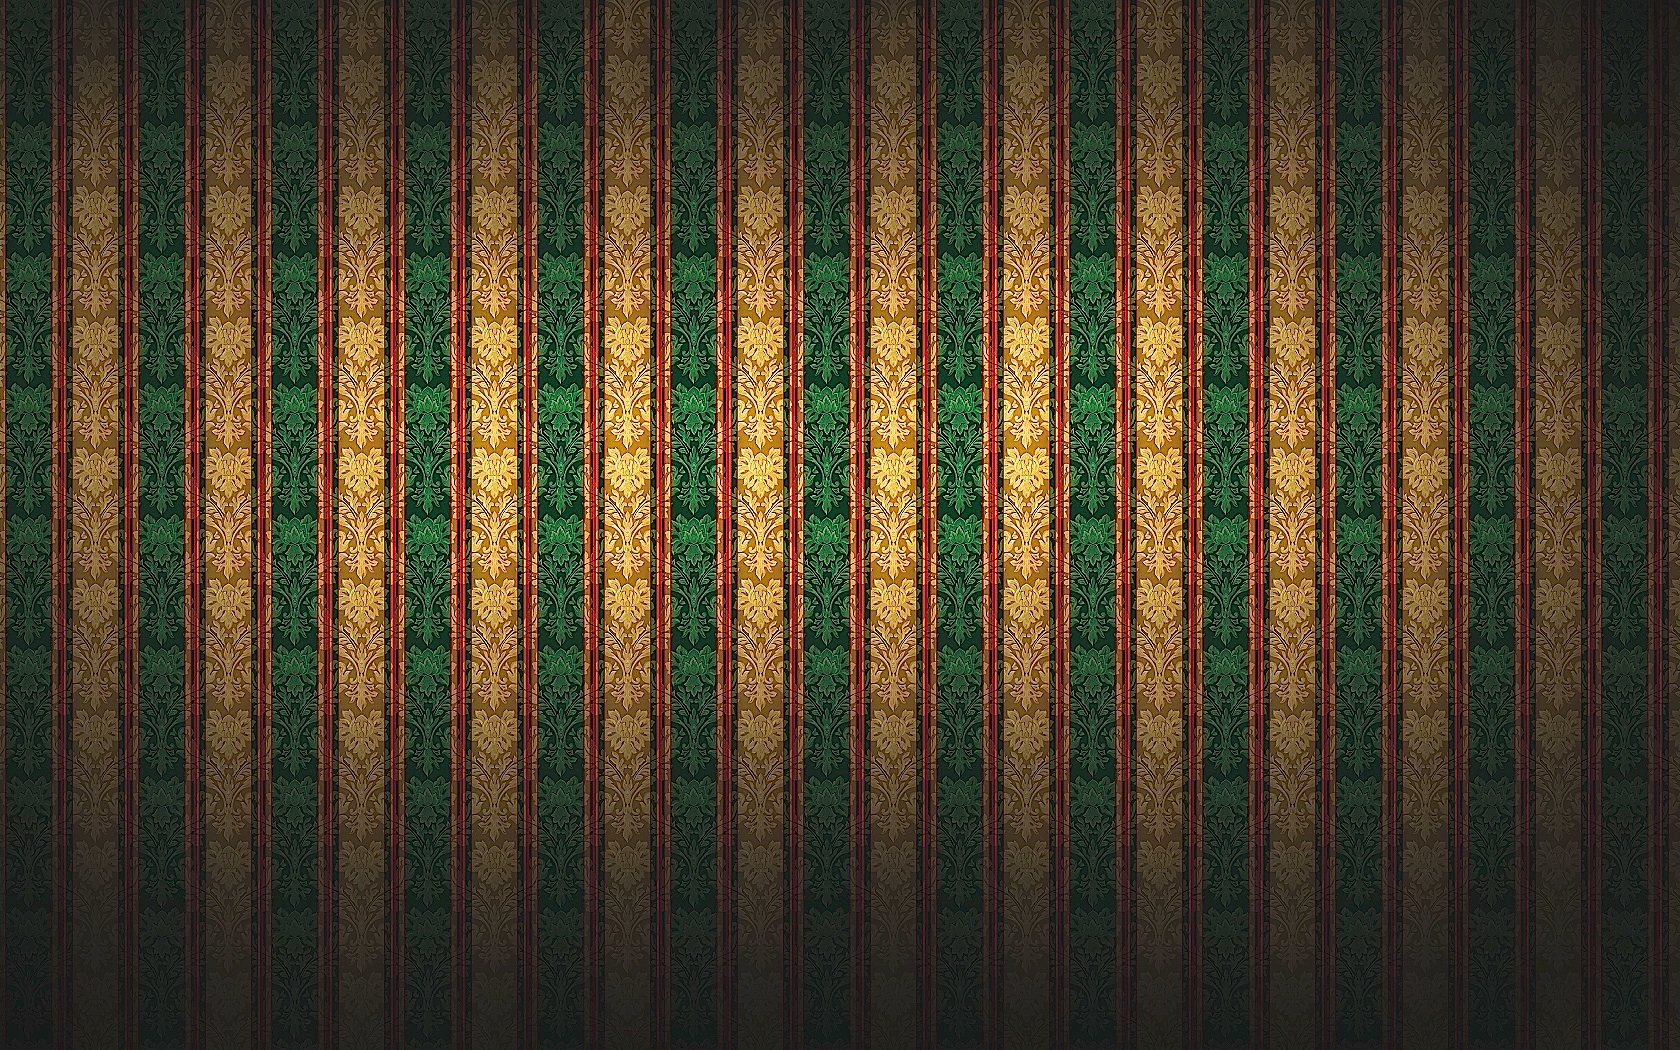 stripes, pattern, abstract, artistic, green